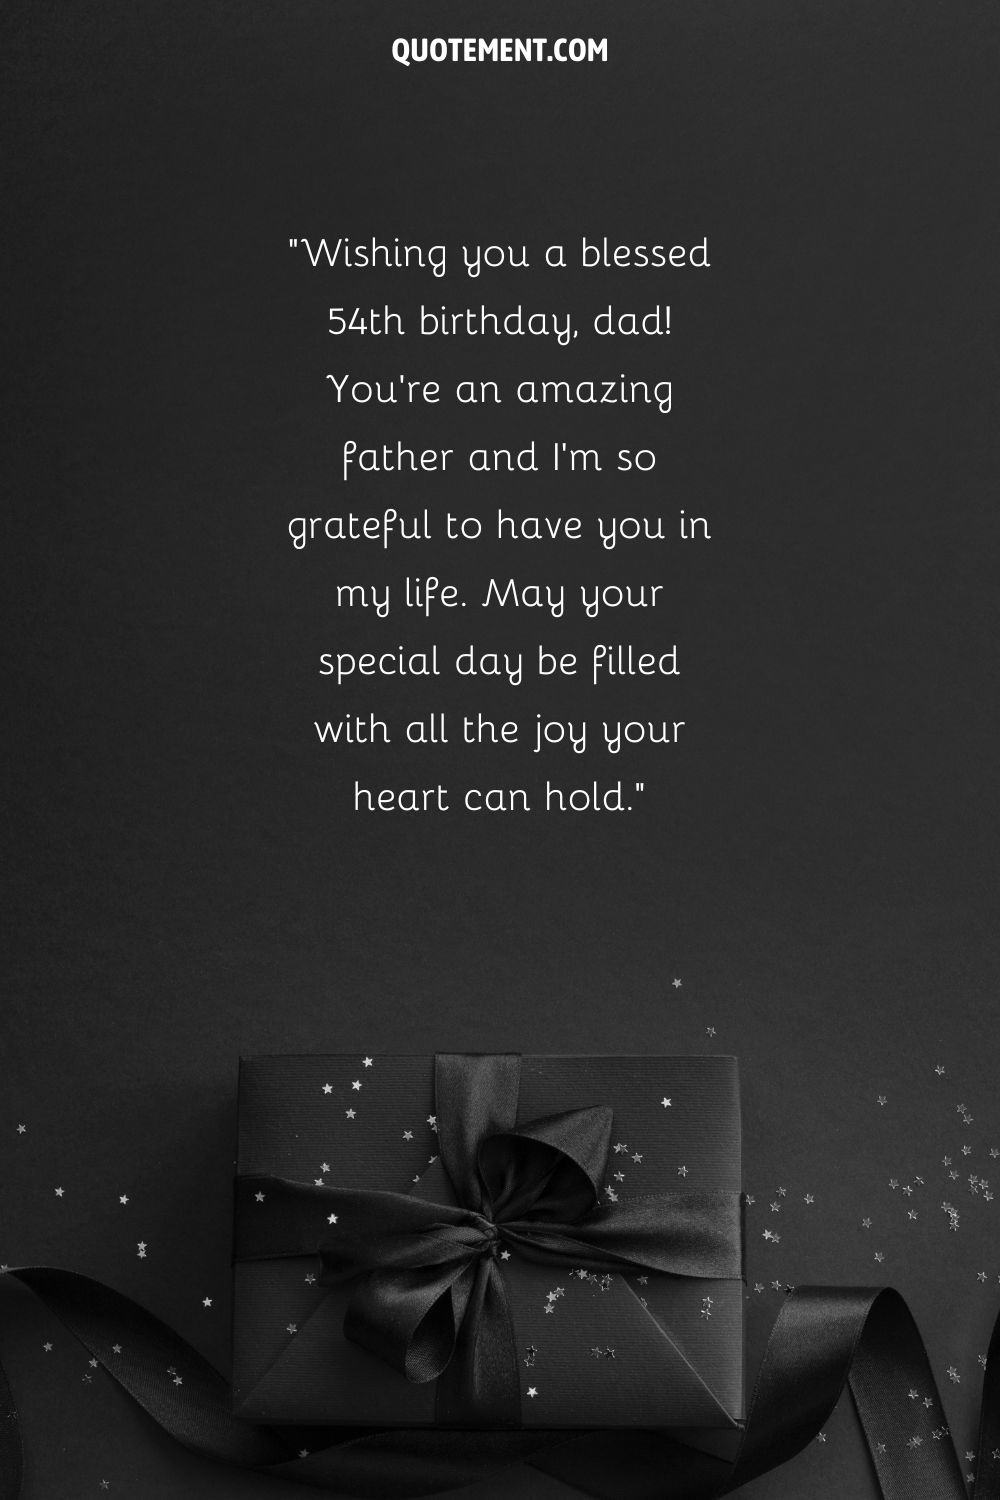 Message for a dad's 54th birthday and a gift wrapped in black under it
